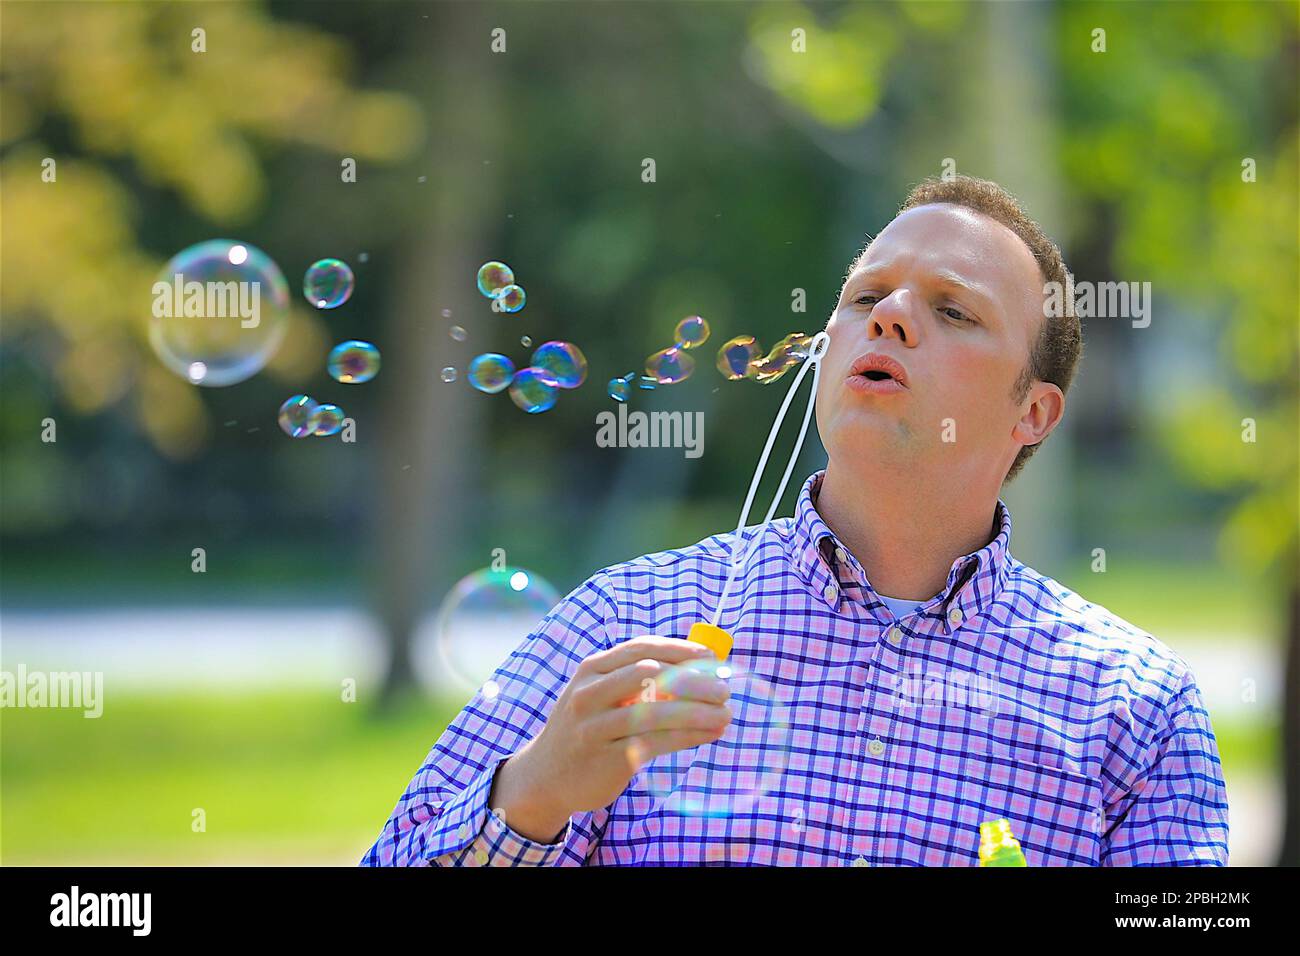 Man blowing bubbles on sunny spring day in park Stock Photo